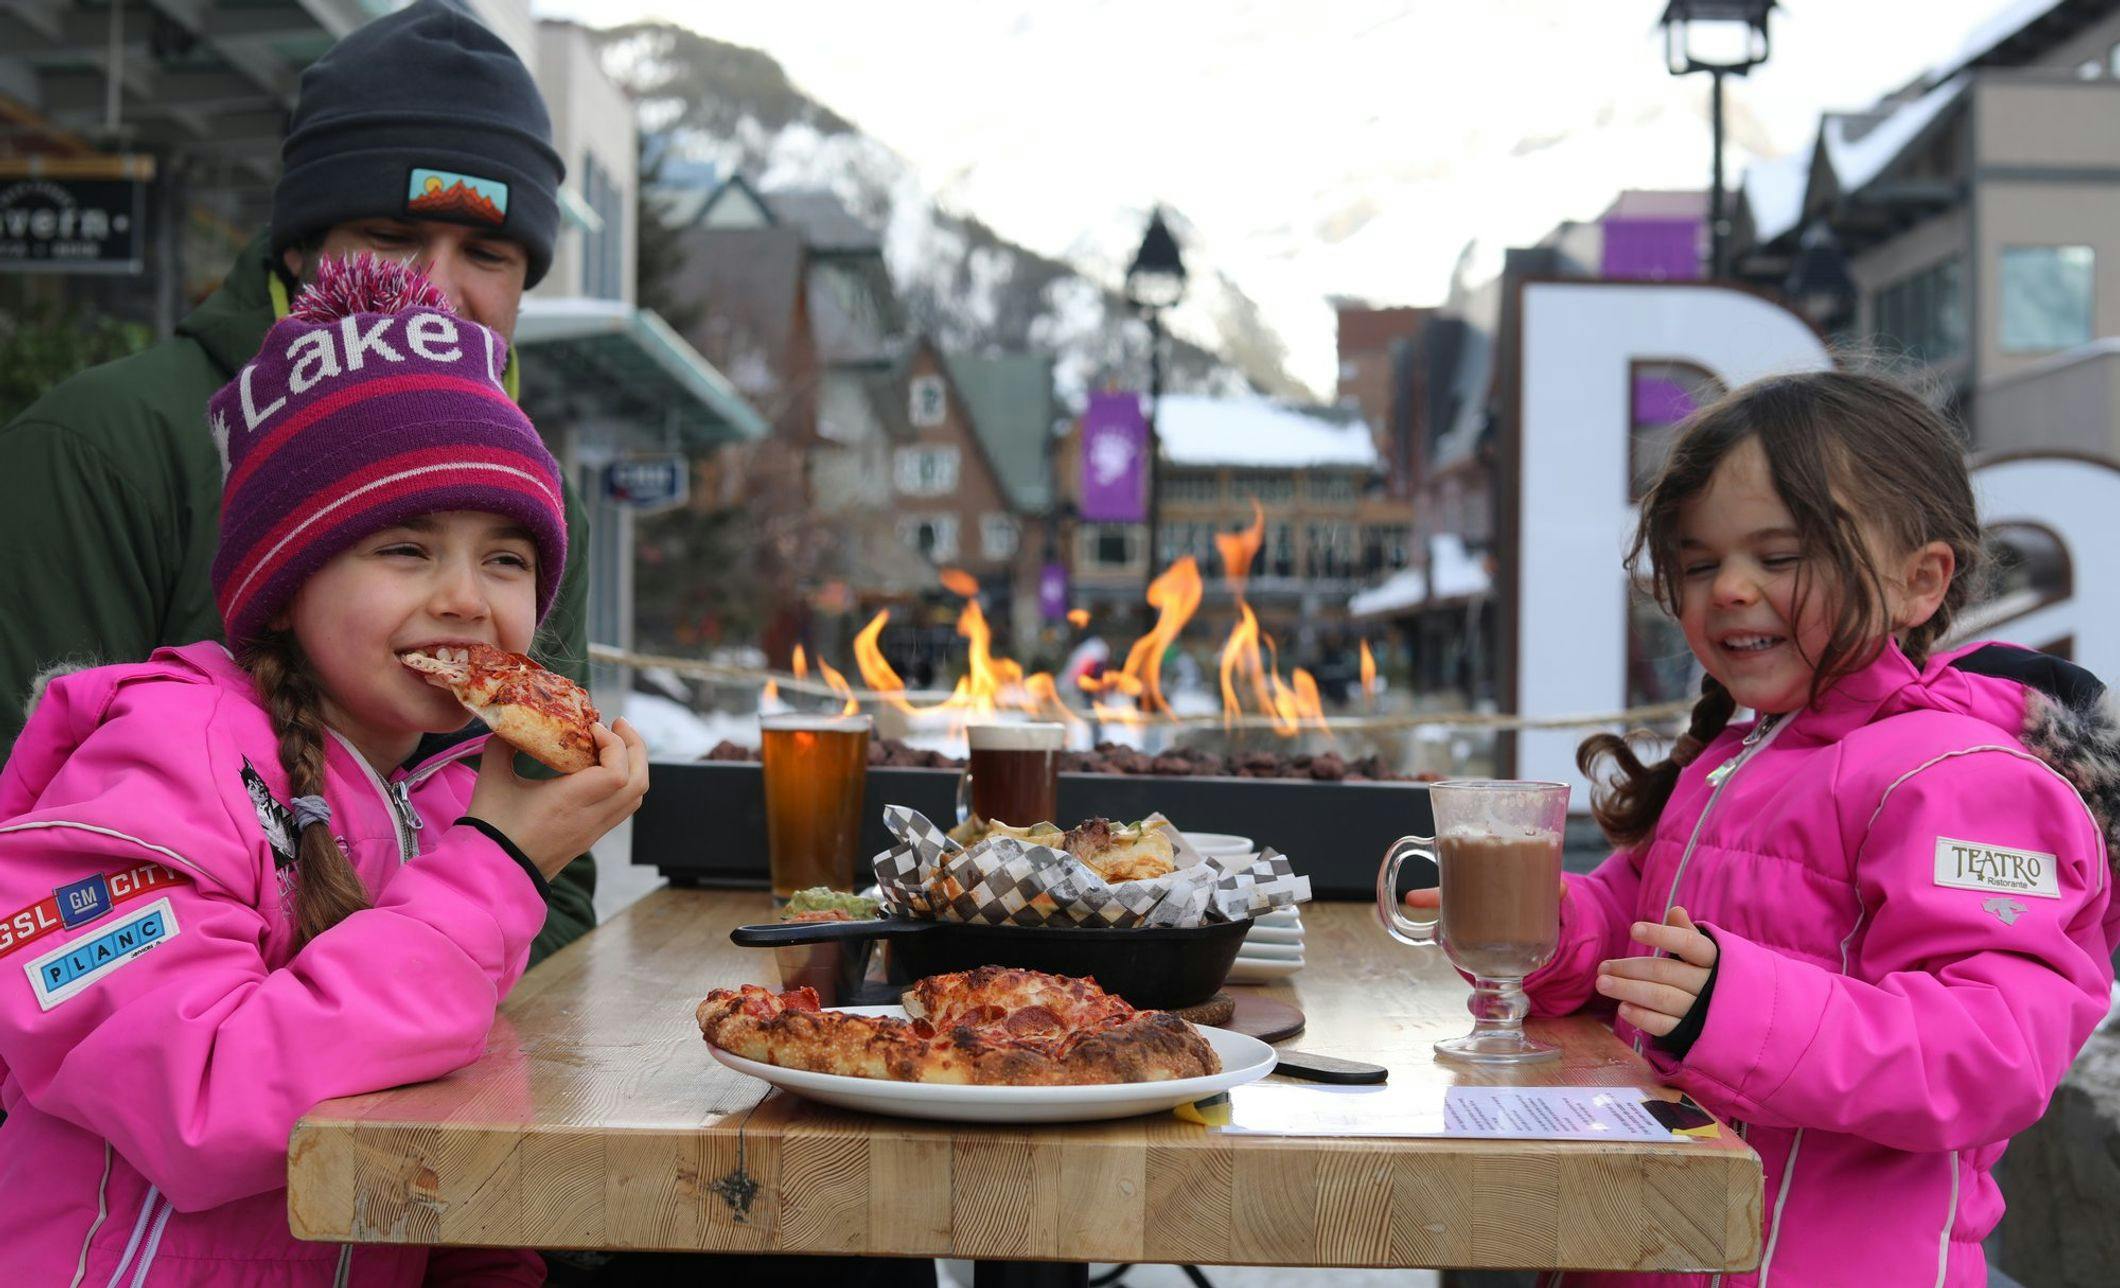 A dad and two young girls enjoy pizza next to an outdoor fireplace 